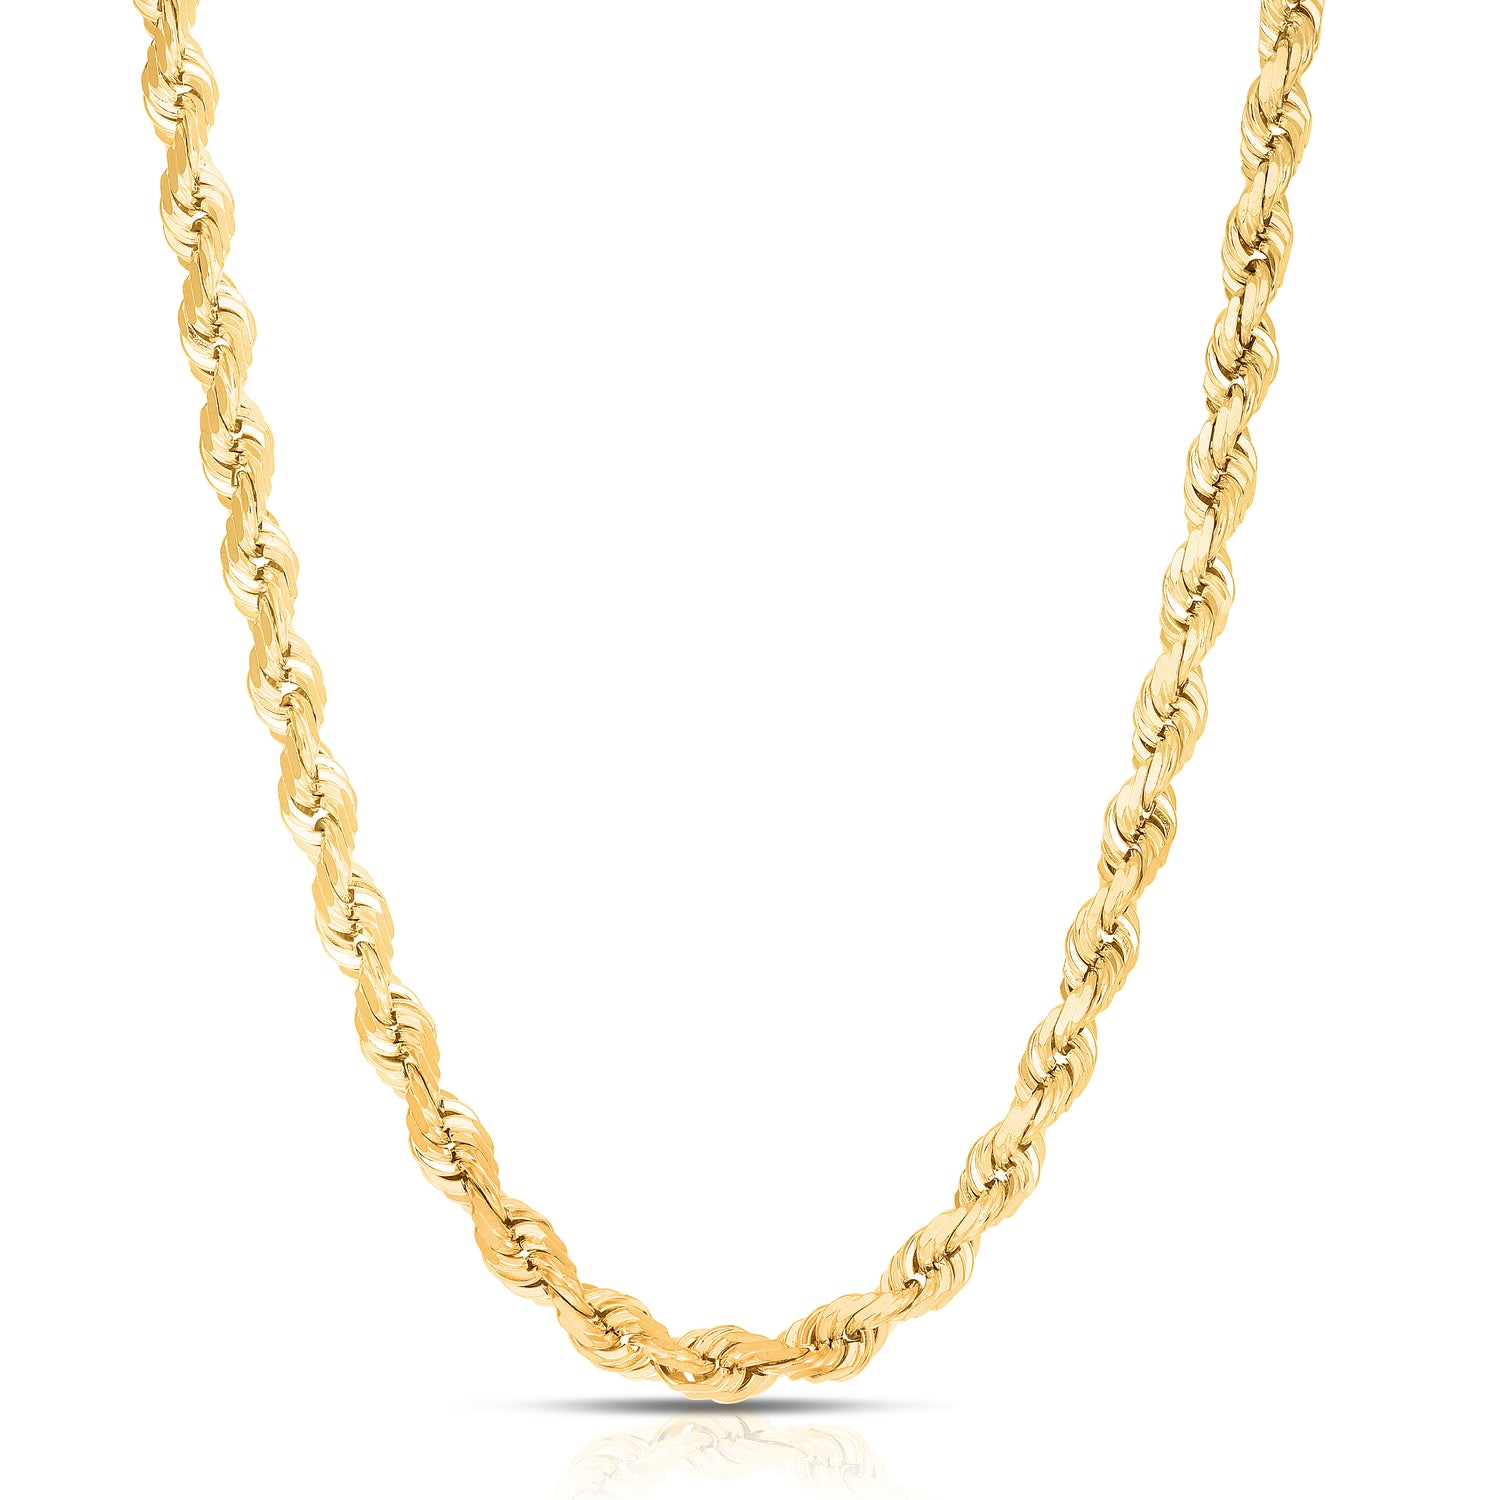 10k Yellow Gold 8mm Solid Diamond Cut Rope Chain Necklace